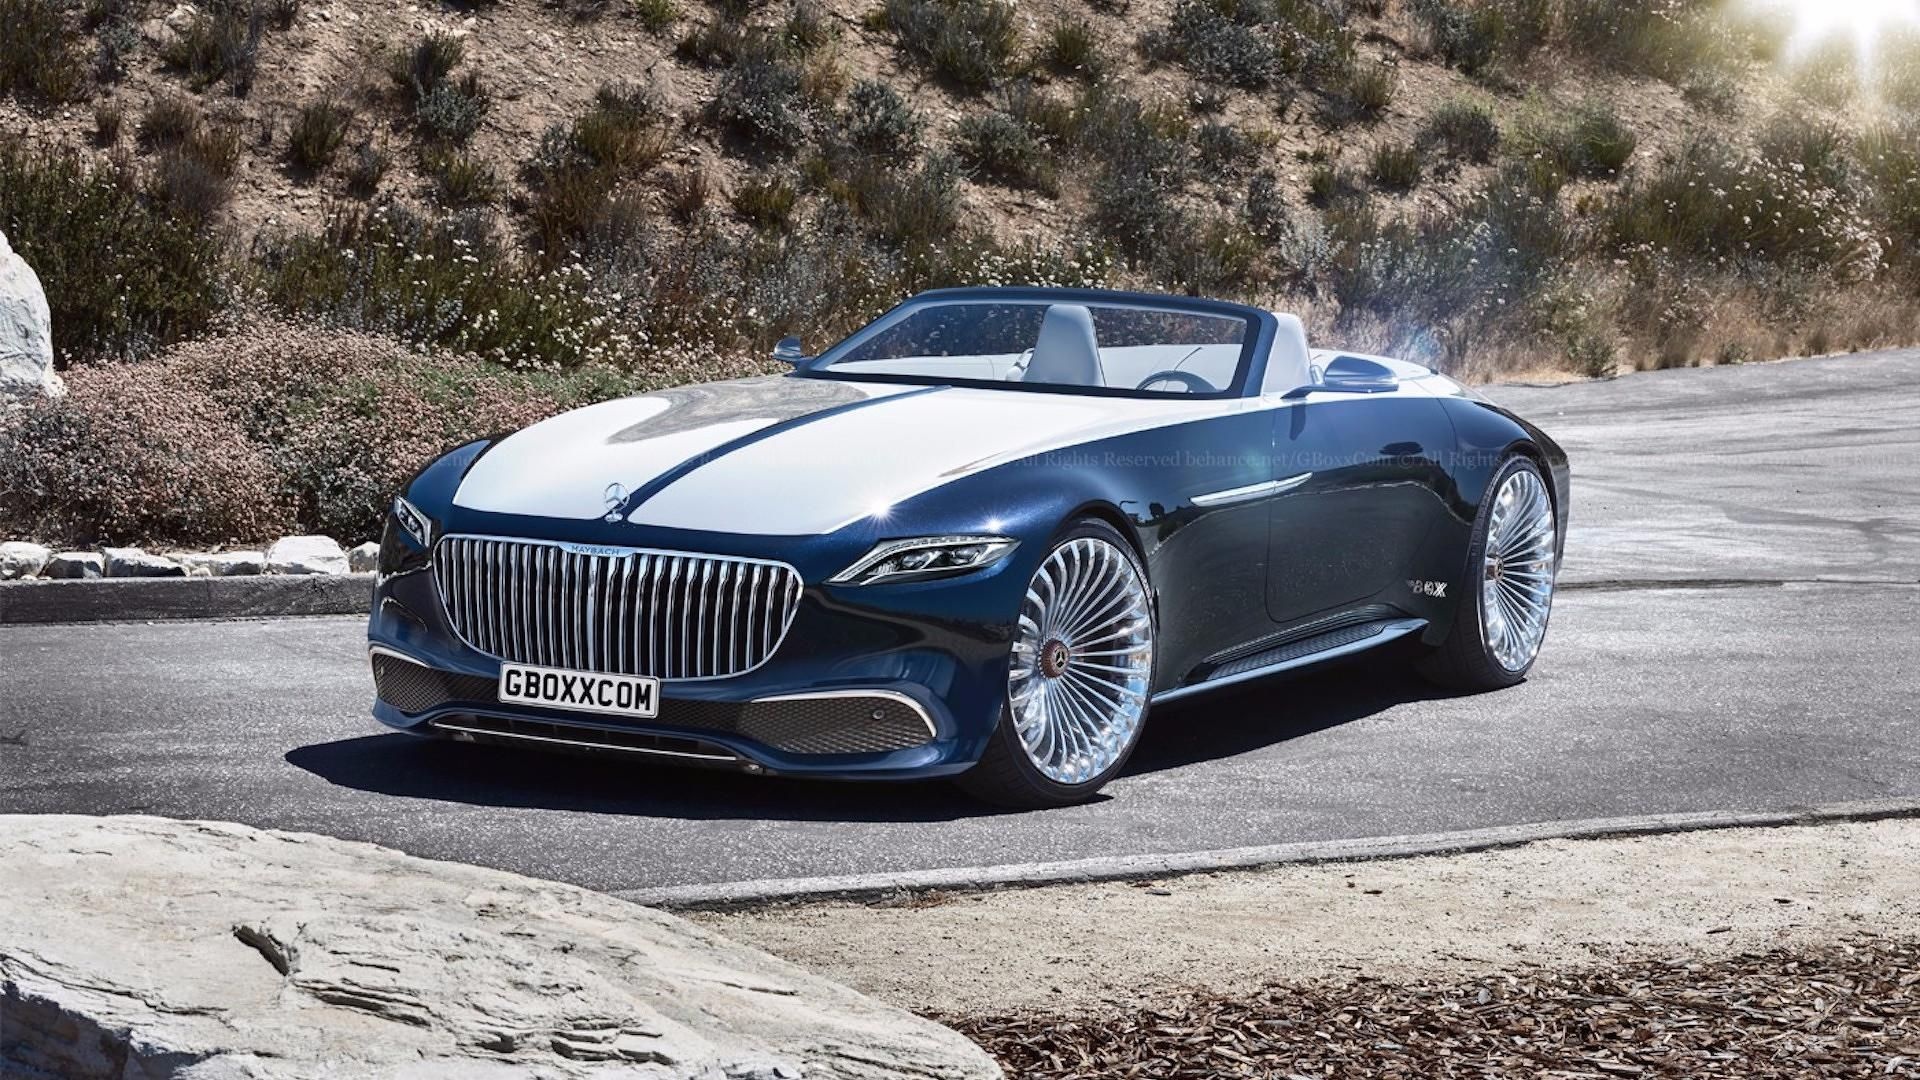 Mercedes-Benz Maybach auto, Mercedes Maybach cabriolet, Stunning design, Production cues, 1920x1080 Full HD Desktop